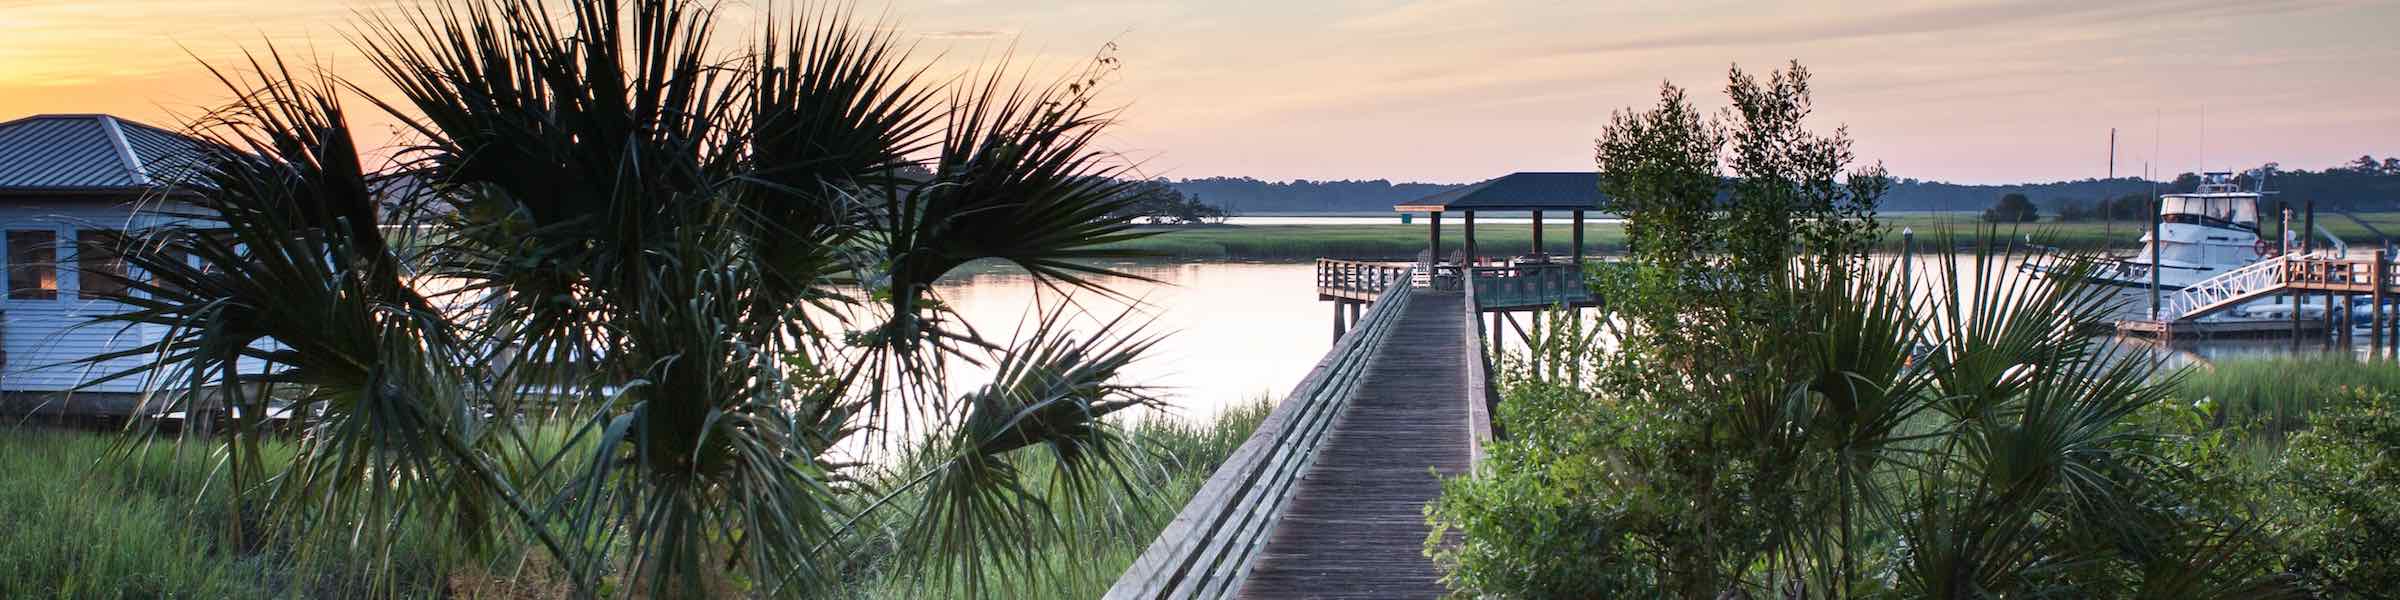 Sunset view of the Skidaway River from Bluff Drive at Isle of Hope, Savannah, GA.